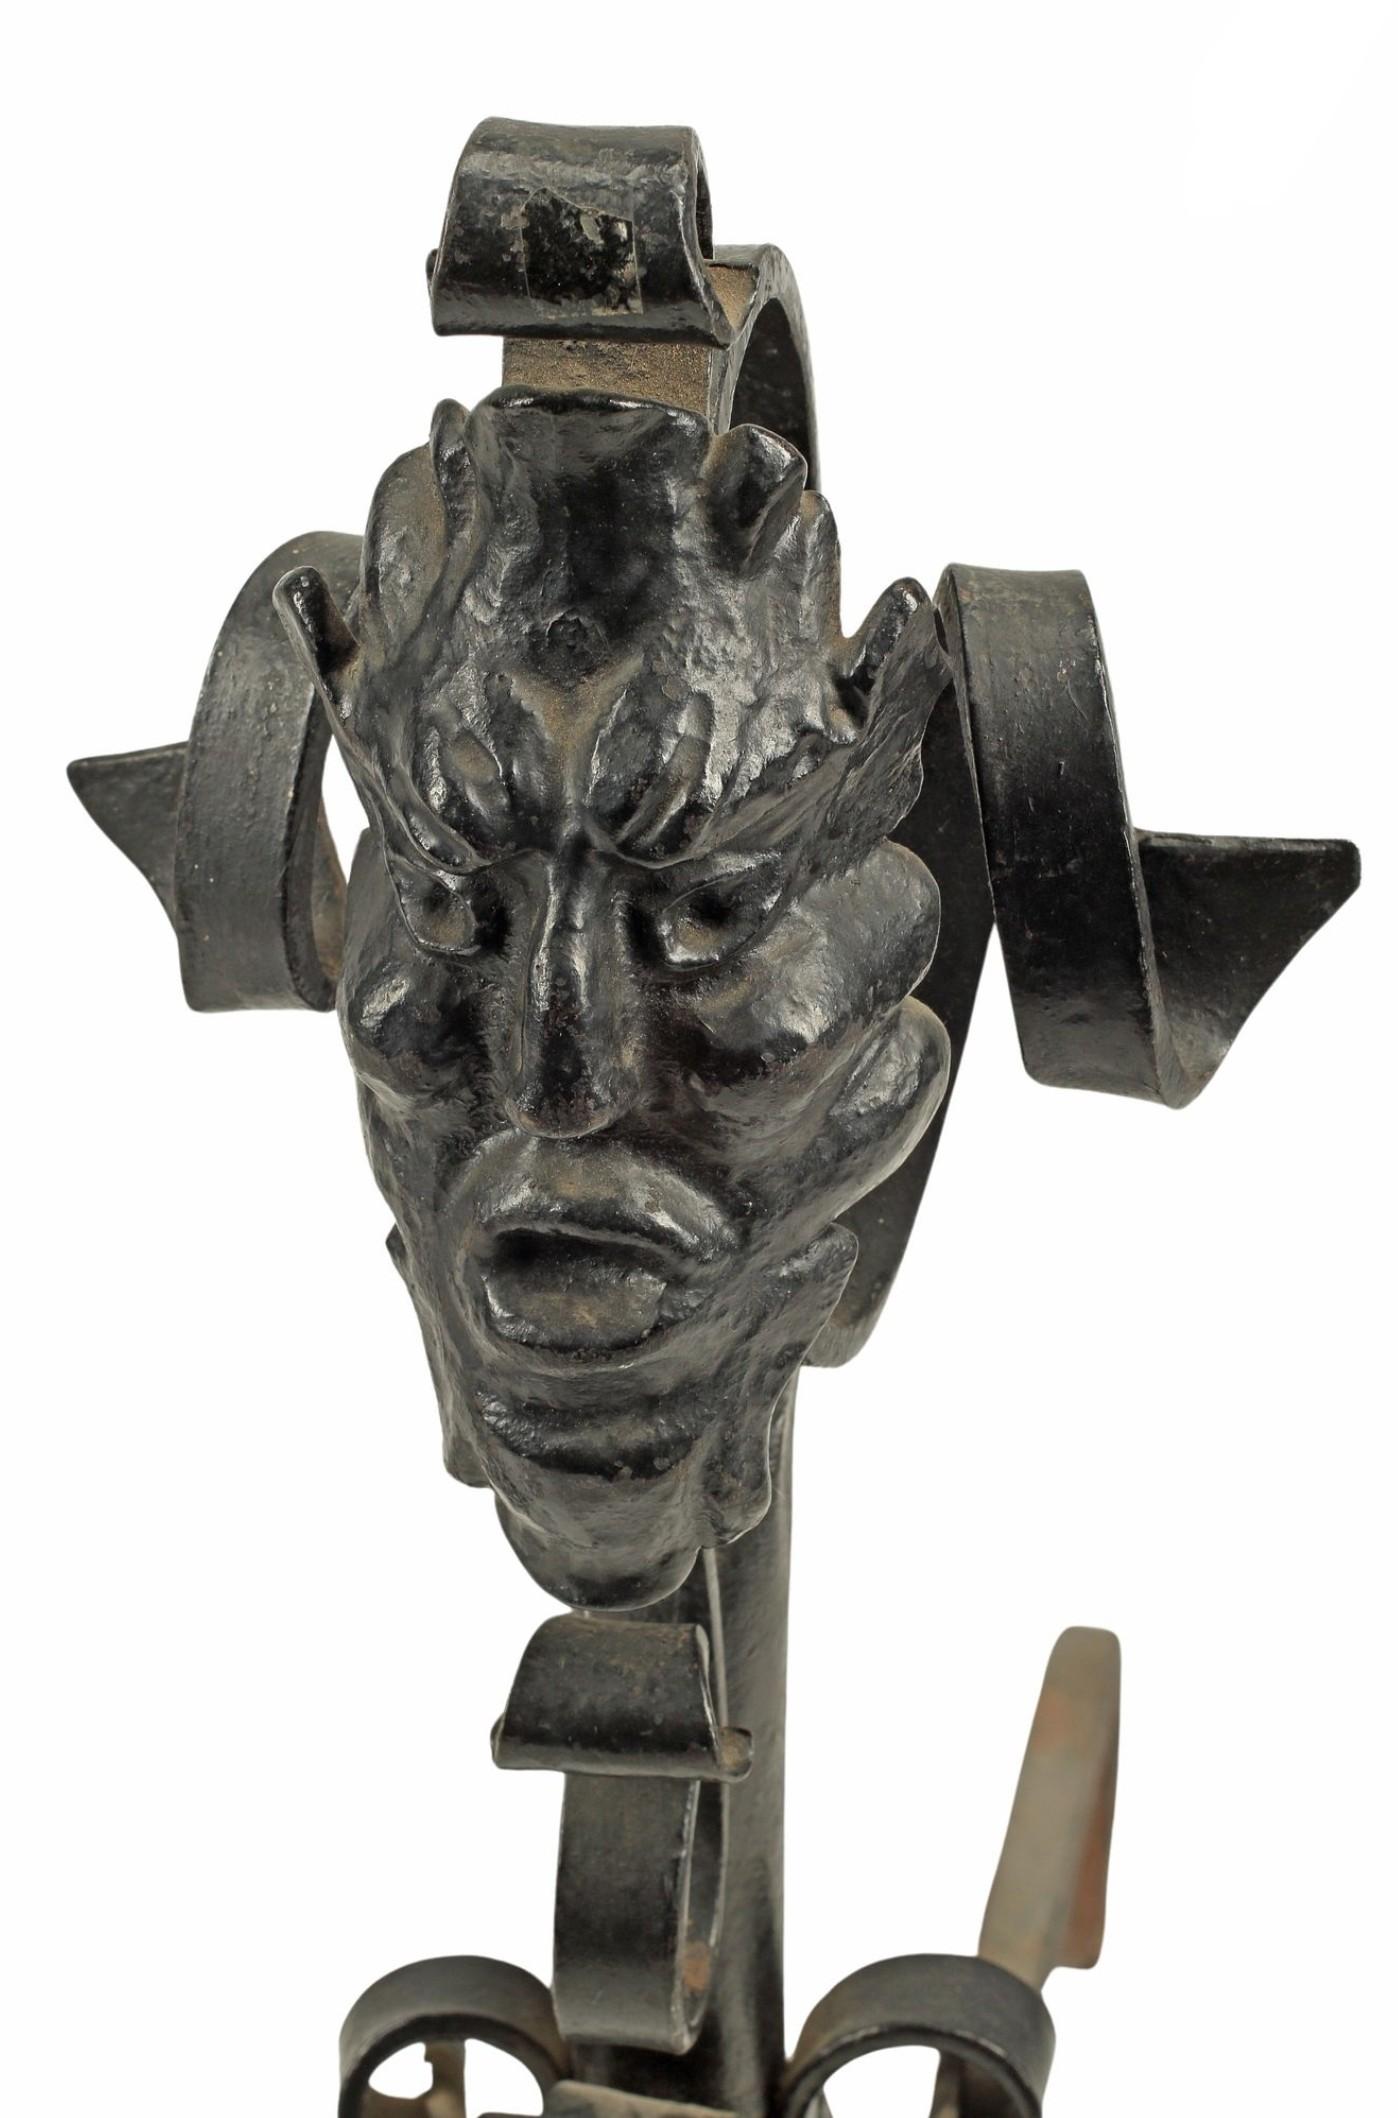 A pair of large and fanciful Victorian Gothic Revival style wrought iron andirons, each with a grotesque mask.

What better place to showcase your devil face than in front of a blazing fireplace? These fantastic sculptural neo-gothic andirons